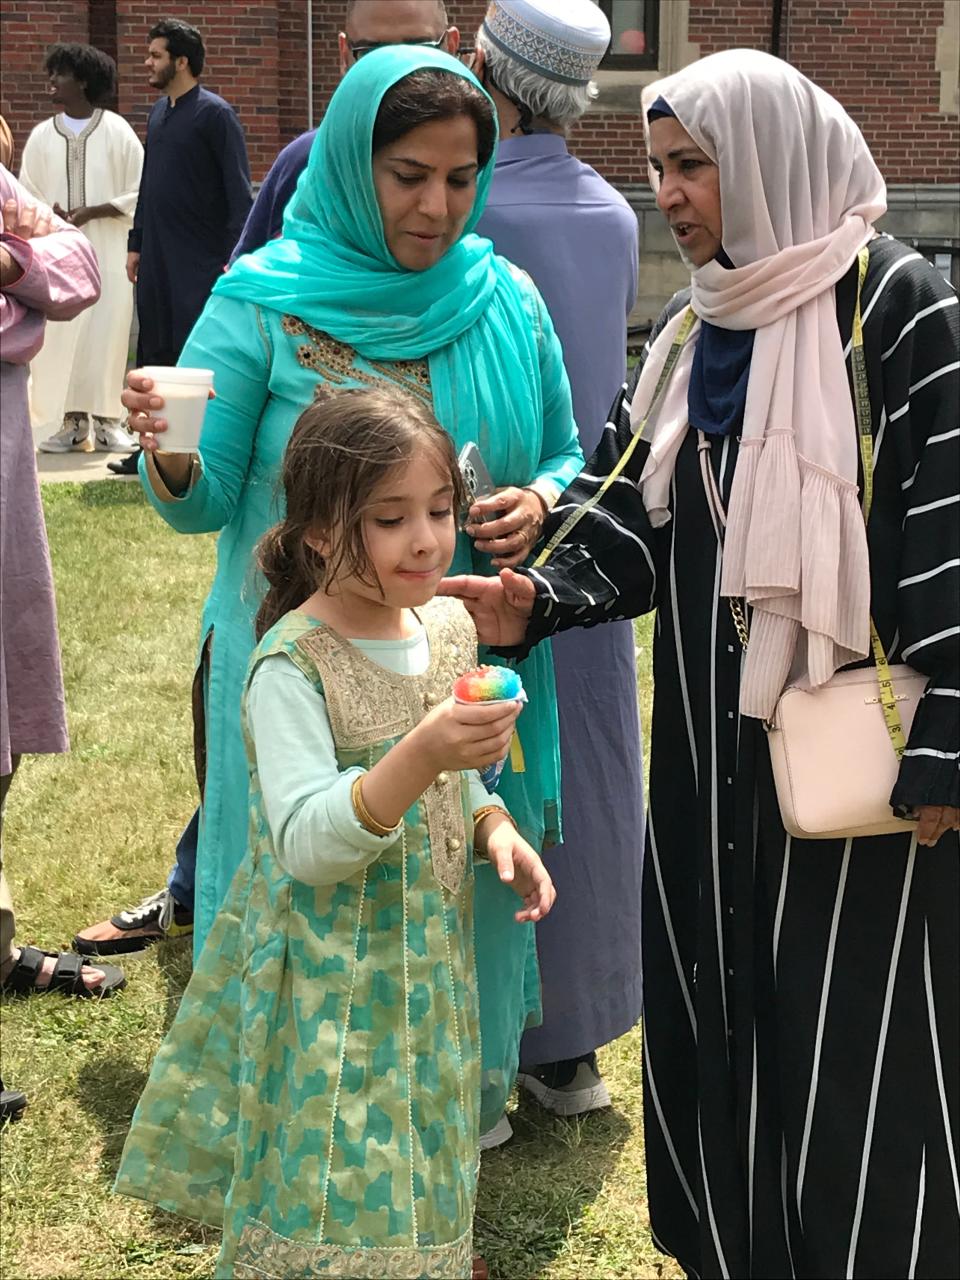 The Khan family from Edgewater enjoying the Eid Festival at the Teaneck Armory